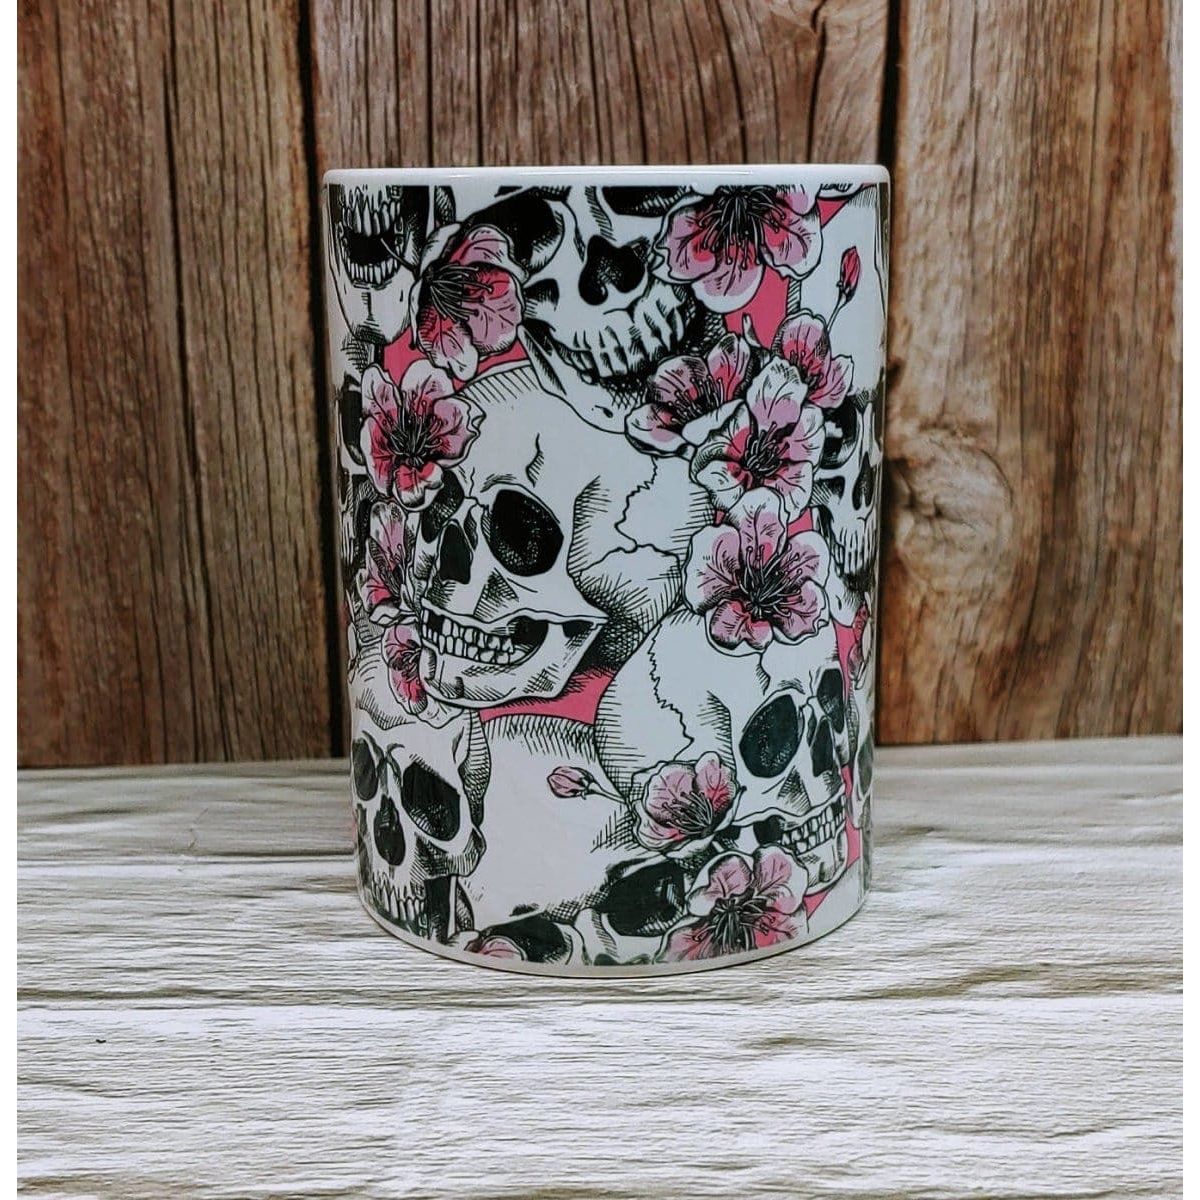 Skulls and Roses Coffee Tea Mug - Hats Signs Patches 3D printing Engraving